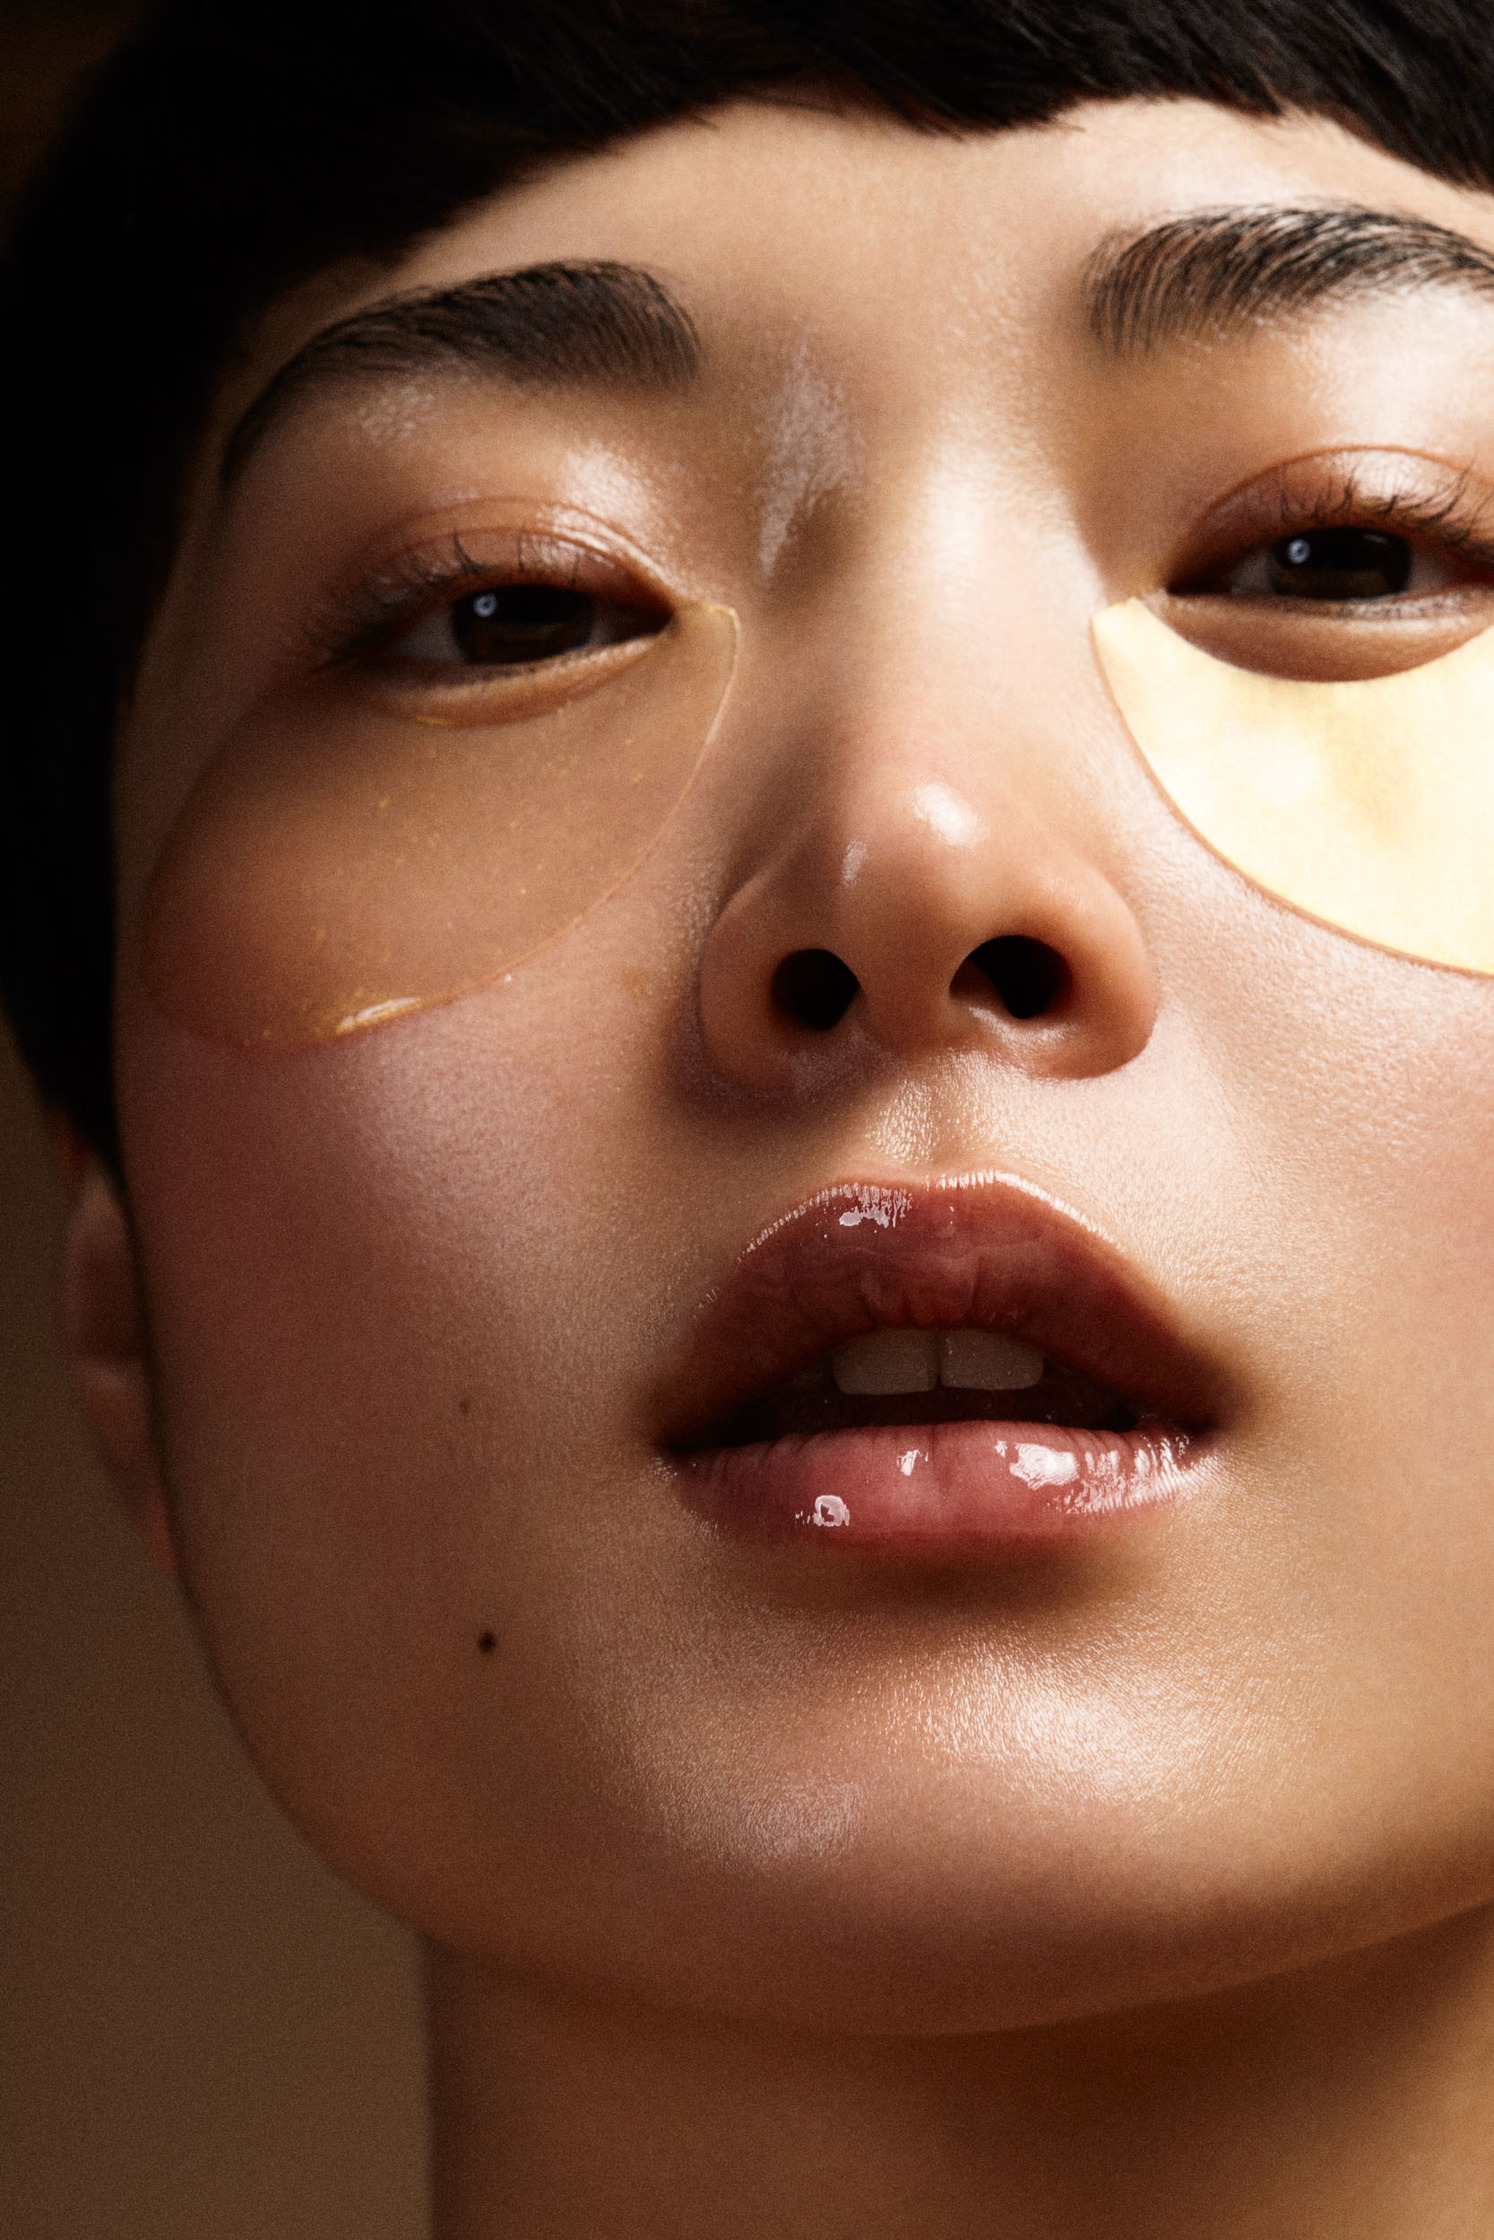 beauty close-up photo of an asian woman with skincare eyepatches  and glossy lipstick by Berlin based photographer Frauke Fischer